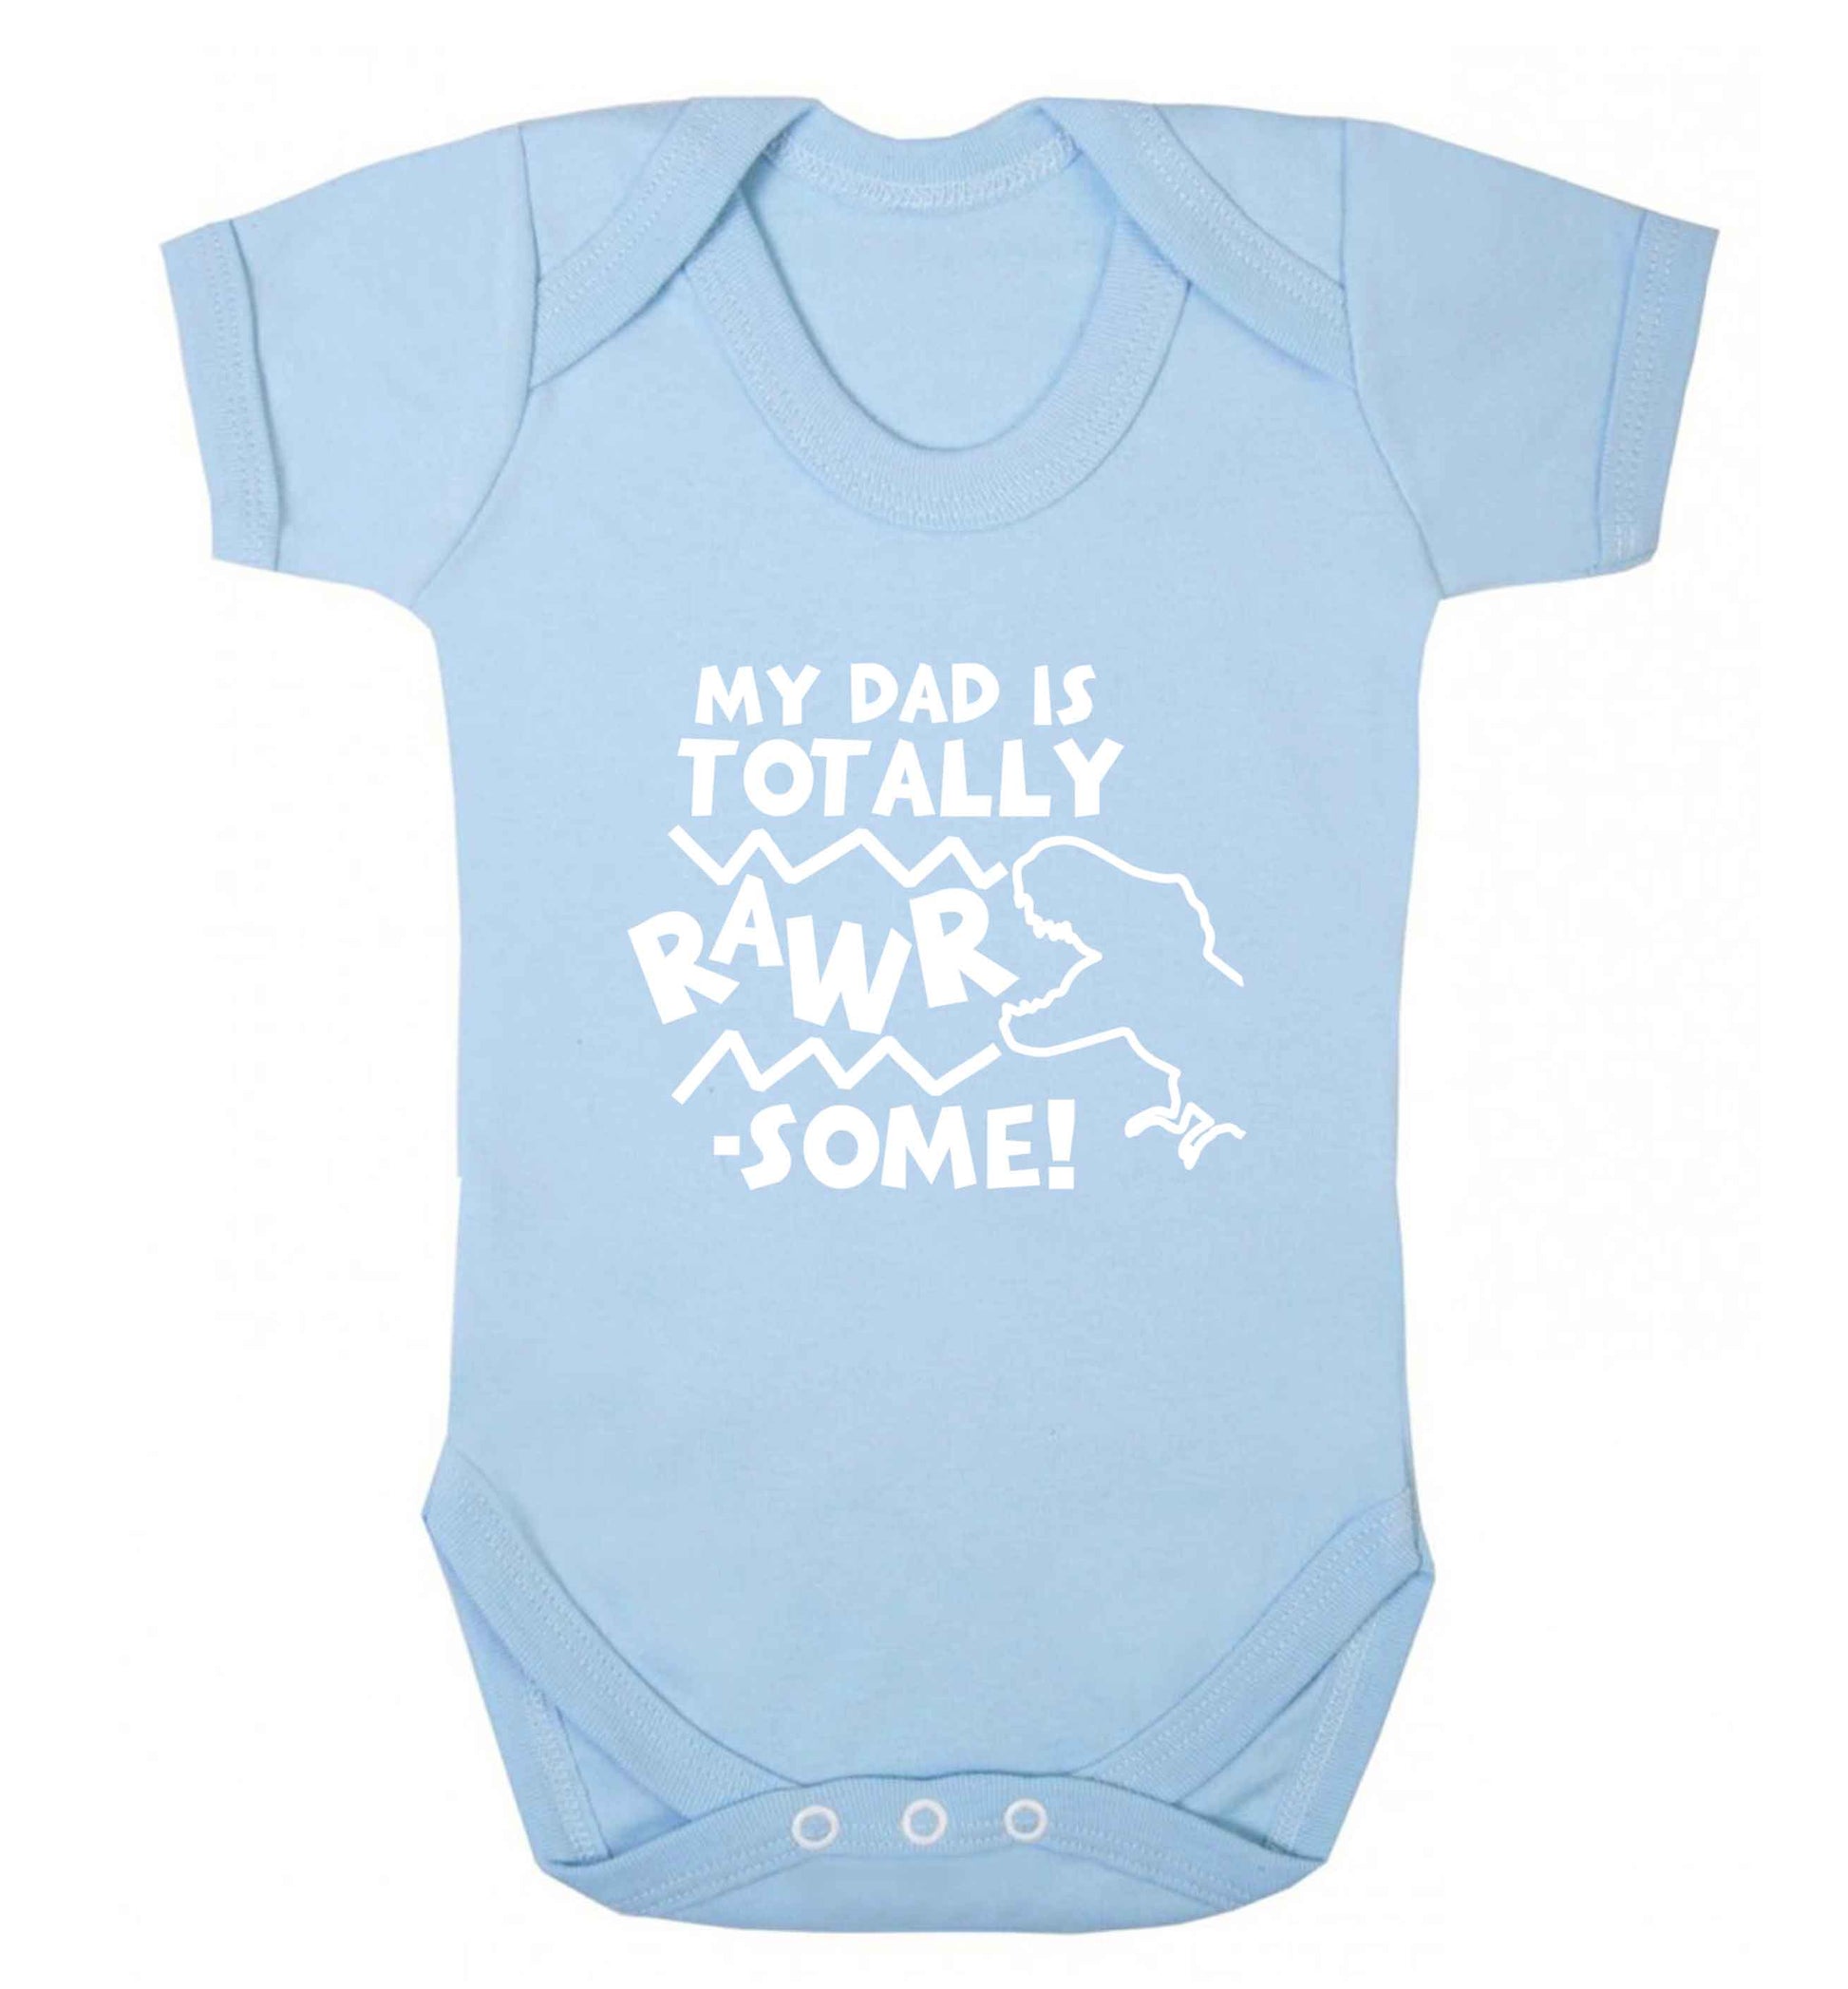 My dad is totally rawrsome baby vest pale blue 18-24 months